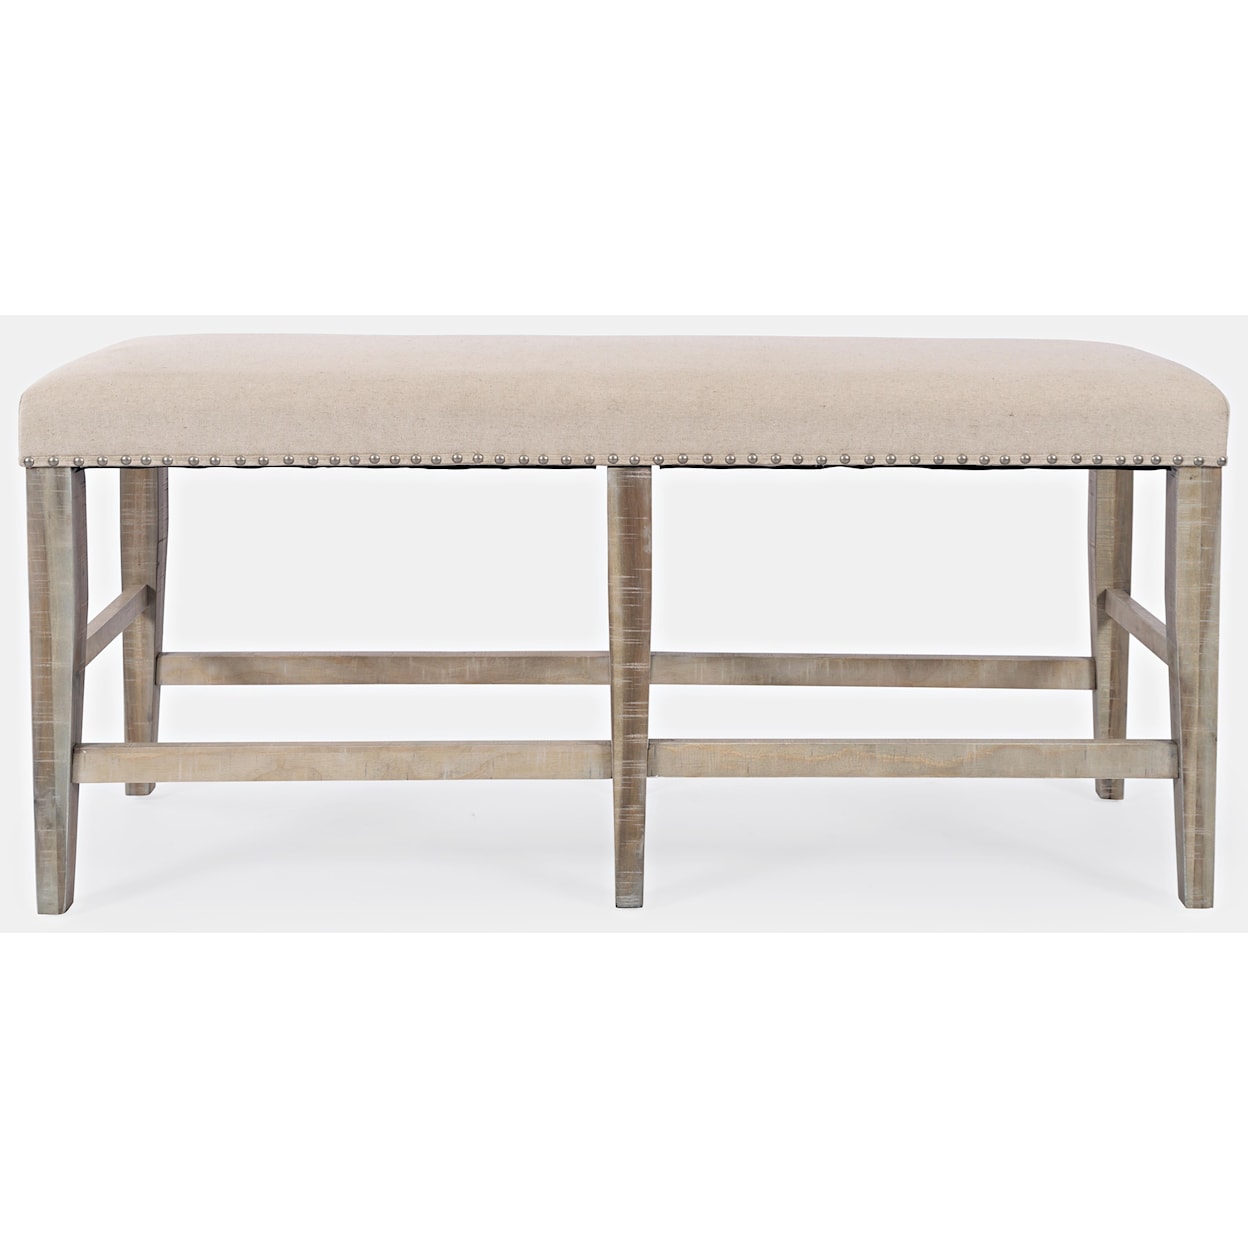 VFM Signature Fairview Backless Counter Bench